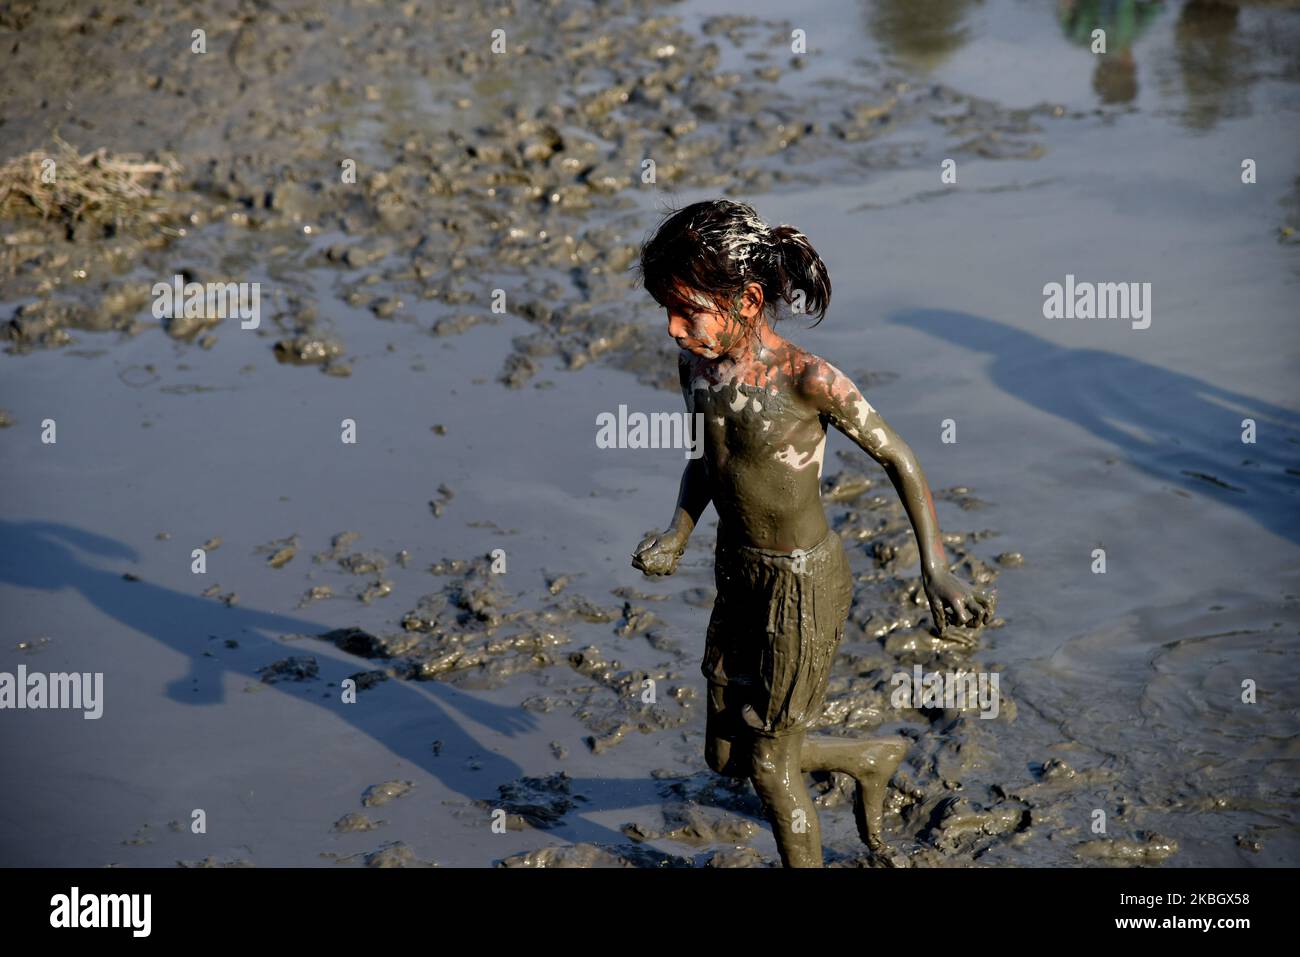 A group of Bangladeshi village children search for fish in a mud-bank of a canal Savar outskirts of Dhaka, Bangladesh, on February 13, 2020.The fisheries industry is a major source of protein for Bangladeshis with a large and rapidly growing number of people in Bangladesh depending on fishing for nutrition and income. (Photo by Mamunur Rashid/NurPhoto) Stock Photo